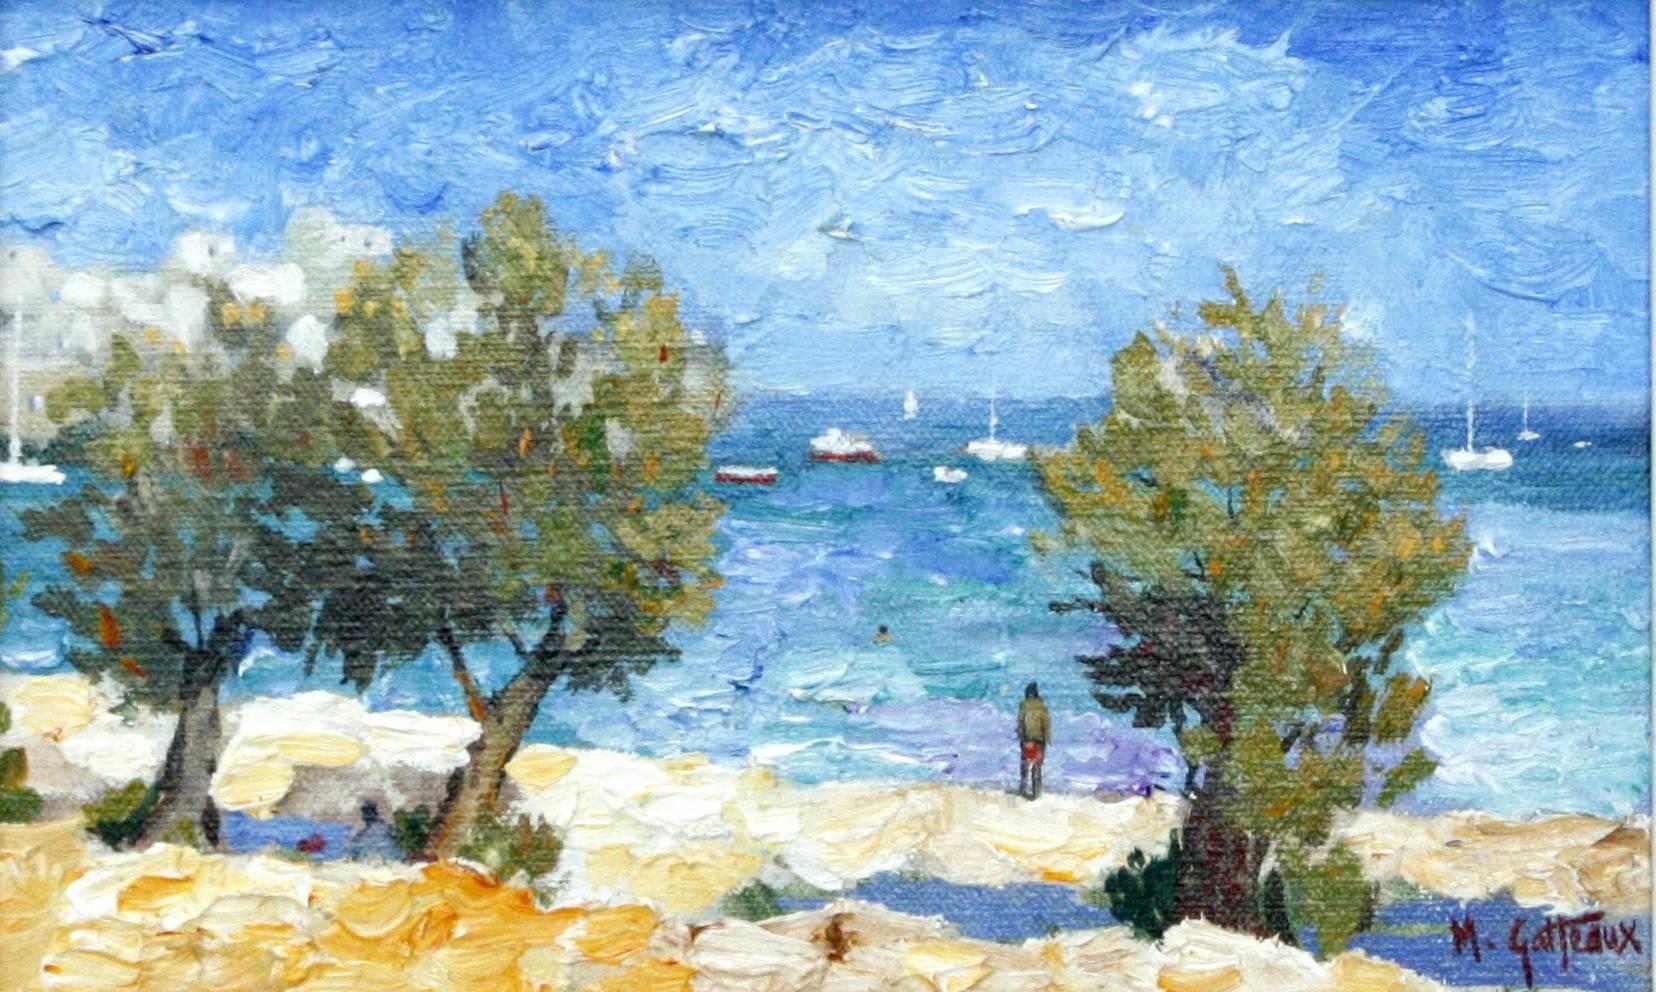 Foegandros, Greece - Painting by Marcel Gatteaux